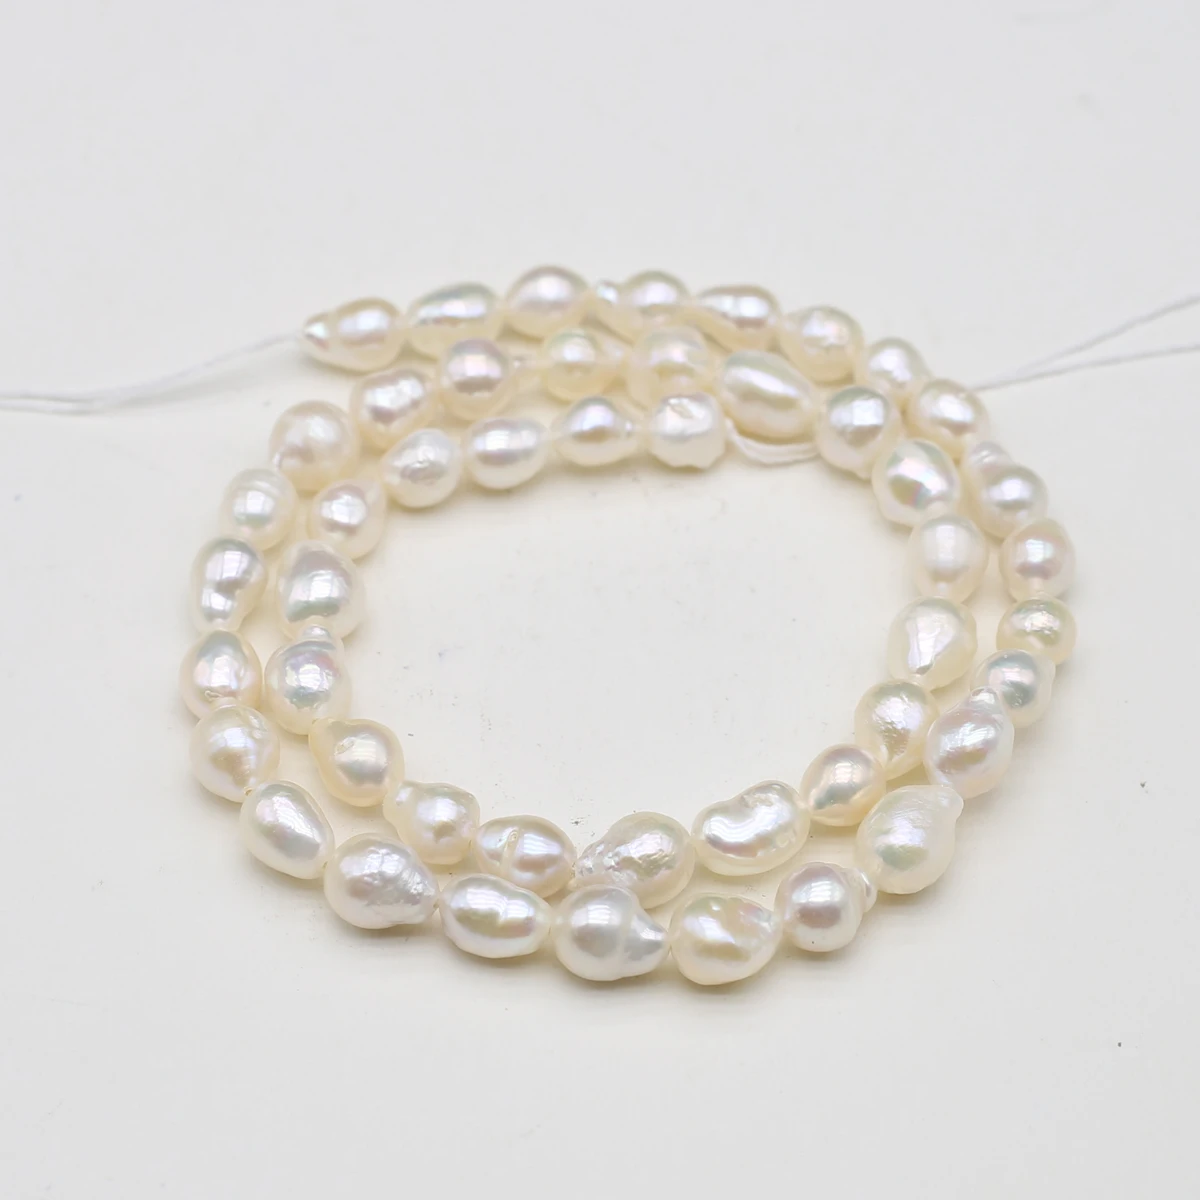 

Natural Freshwater Cultured Pearls Beads Confuse Loose Spacer Beads for Women Jewelry Making Elegant Bracelet DIY Necklace 36CM